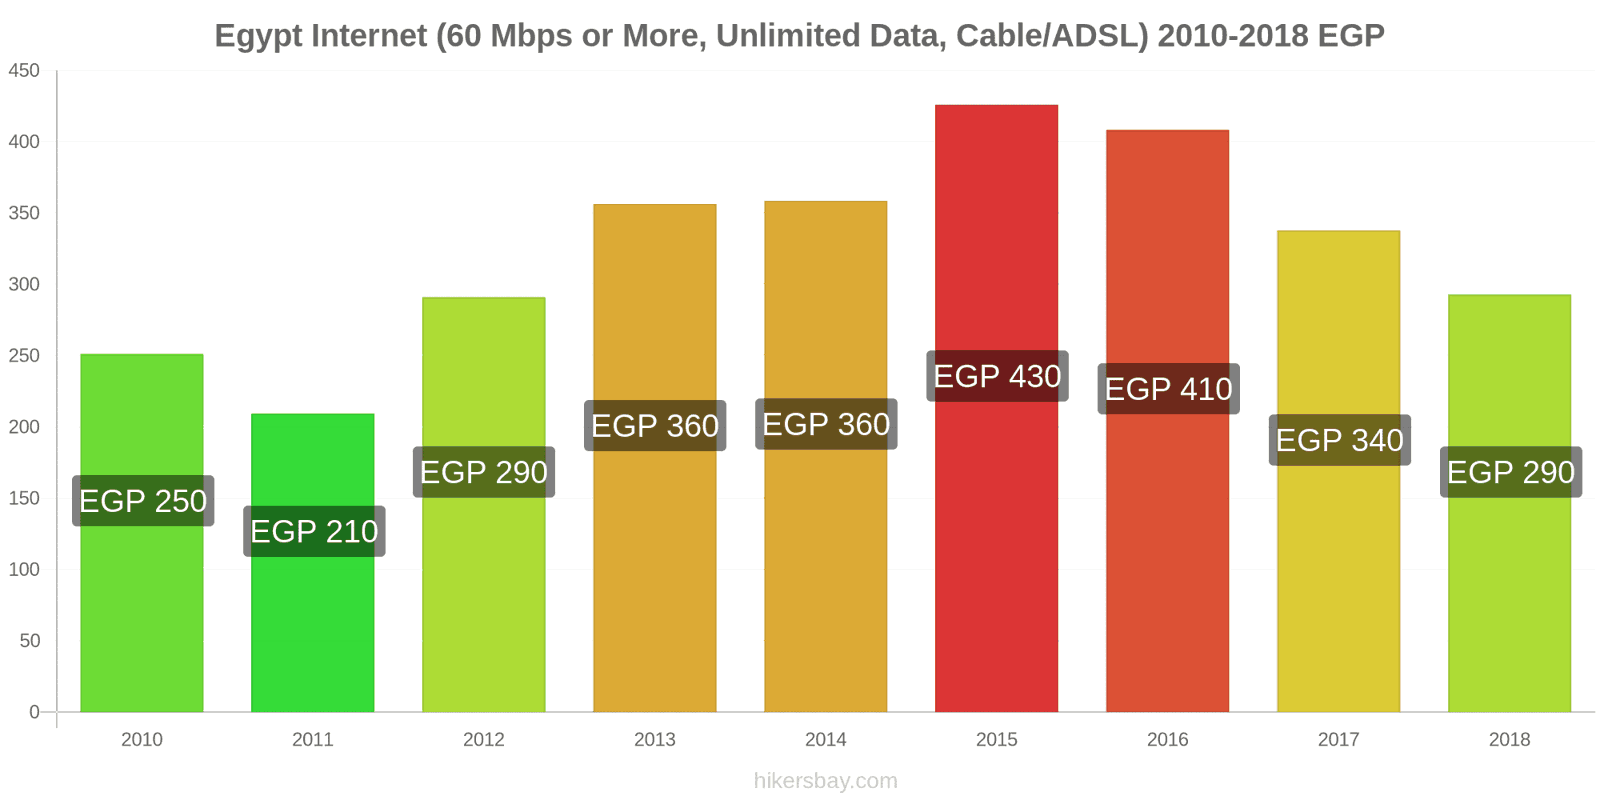 Egypt price changes Internet (60 Mbps or more, unlimited data, cable/ADSL) hikersbay.com